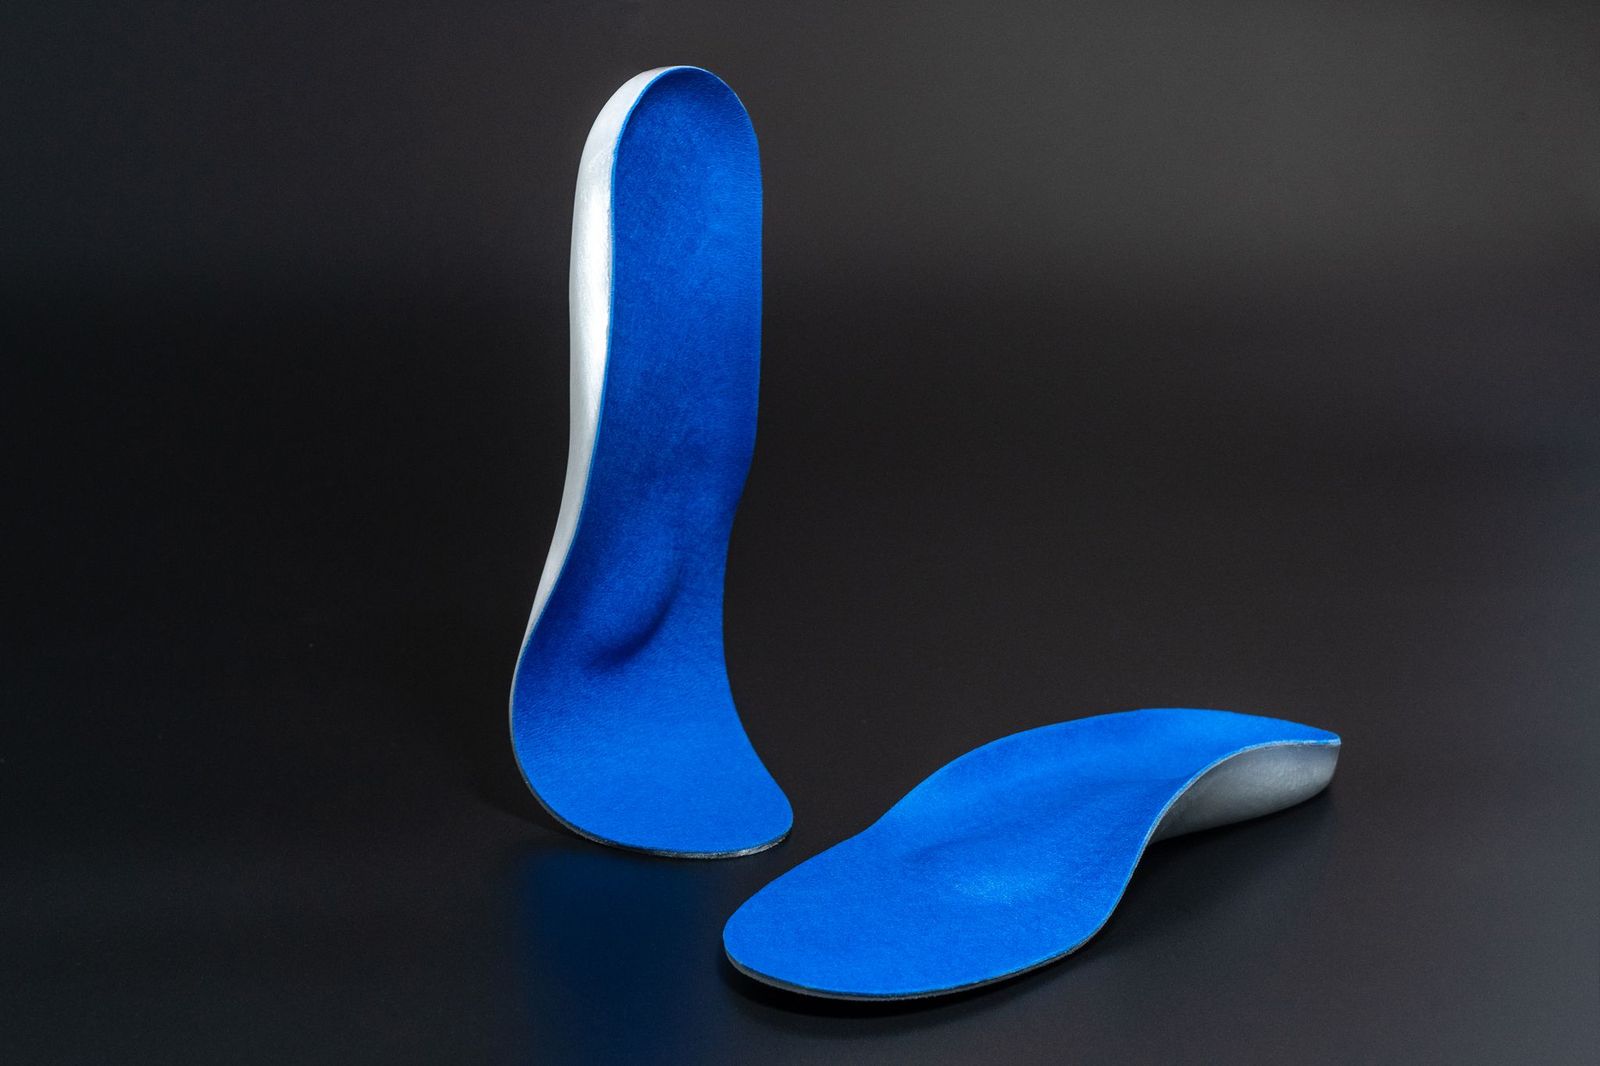 3D printed insoles with added felt lining in radient blue